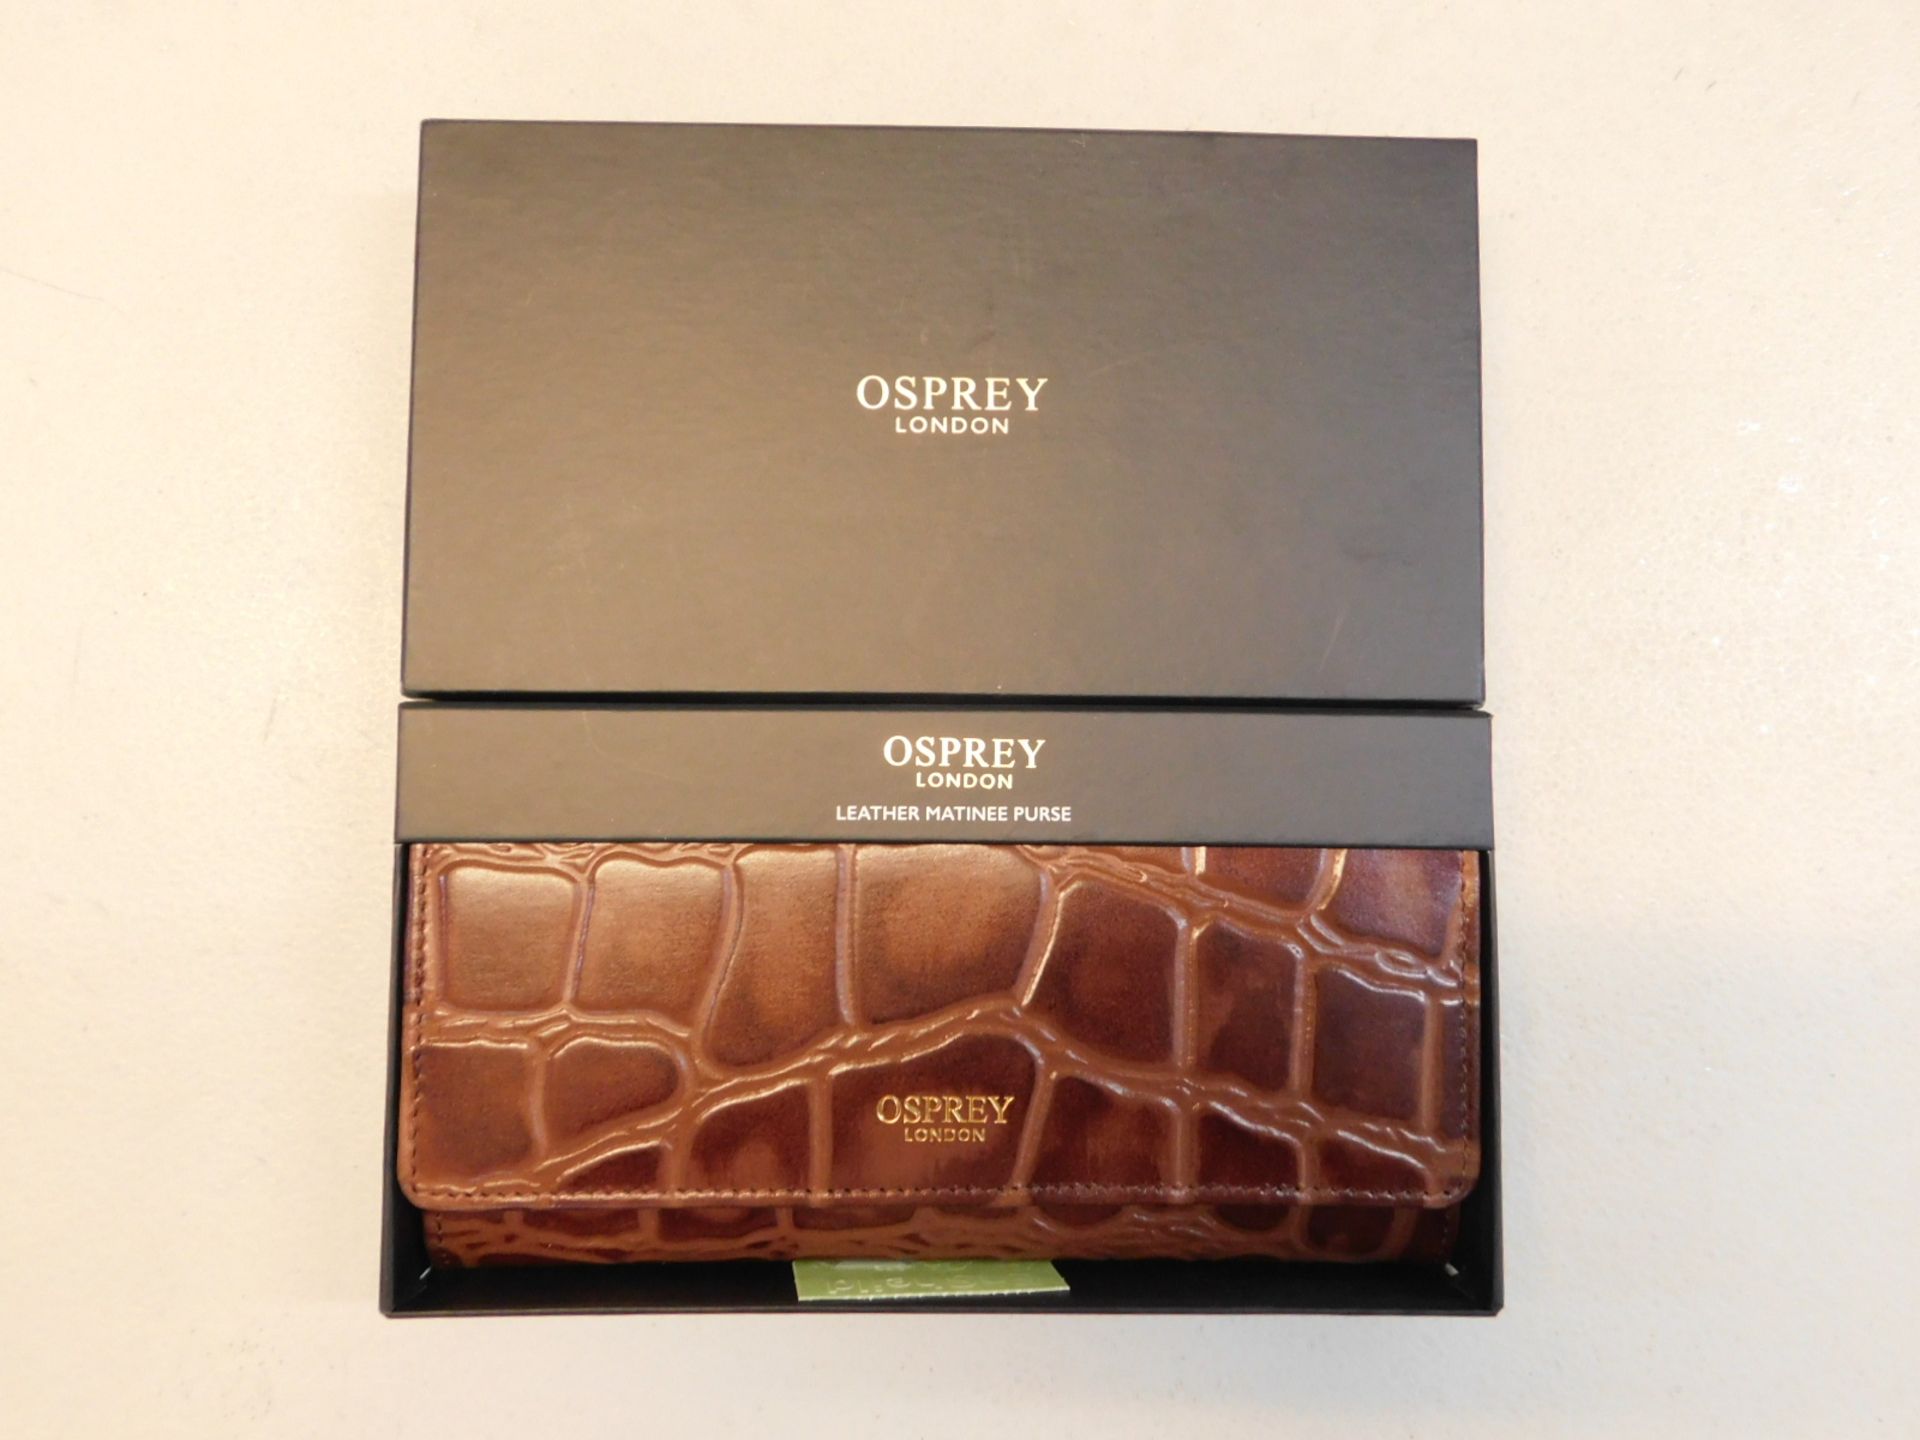 1 BOXED OSPREY WOMENS LEATHER MATINEE PURSE RRP Â£34.99